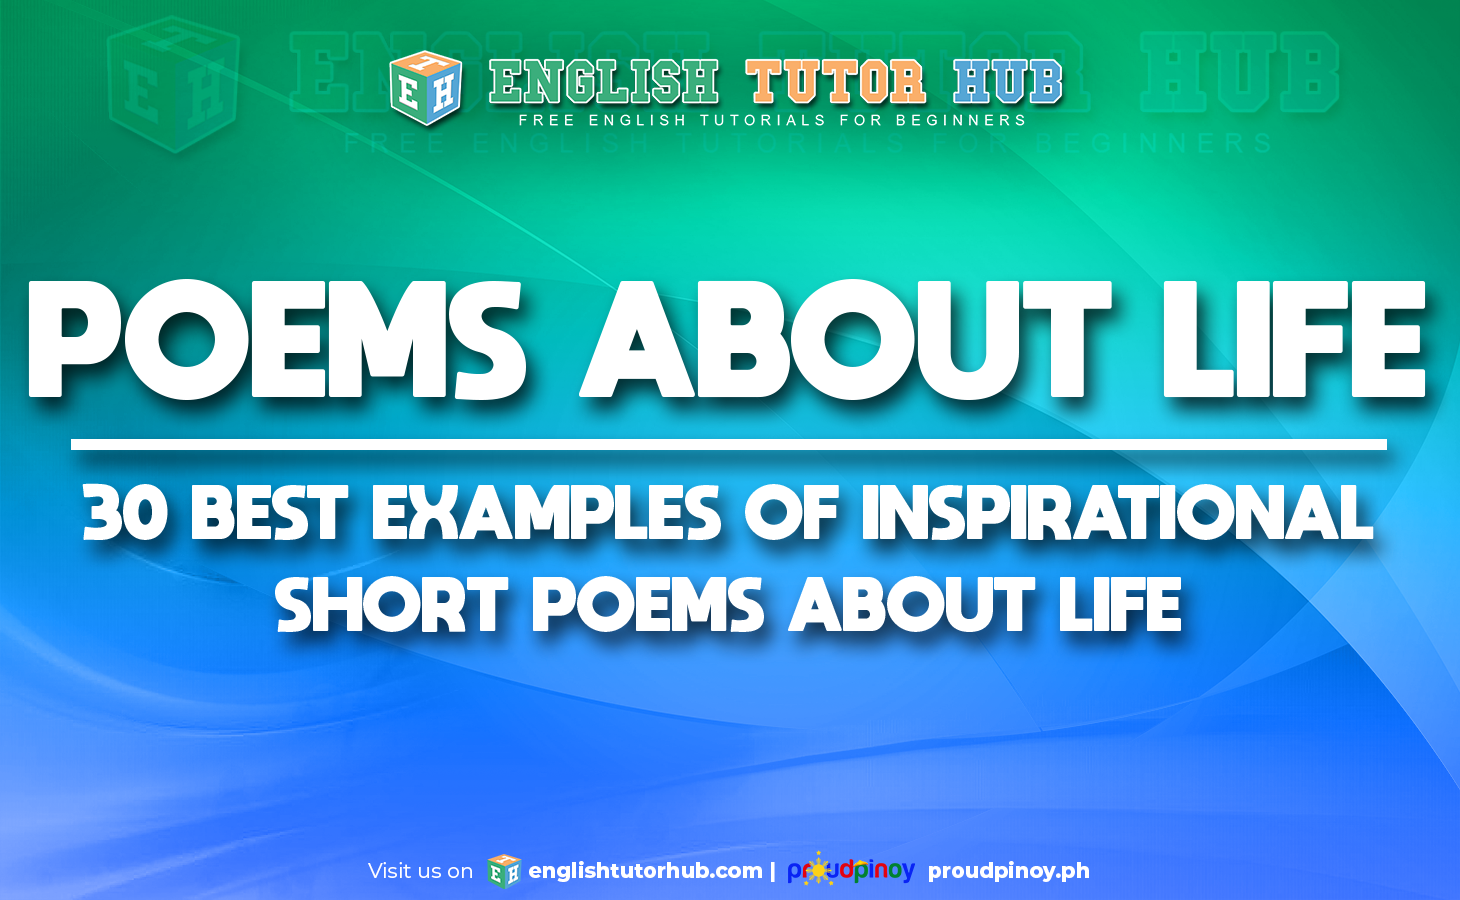 POEMS ABOUT LIFE - 30 BEST EXAMPLES OF INSPIRATIONAL SHORT POEMS ABOUT LIFE